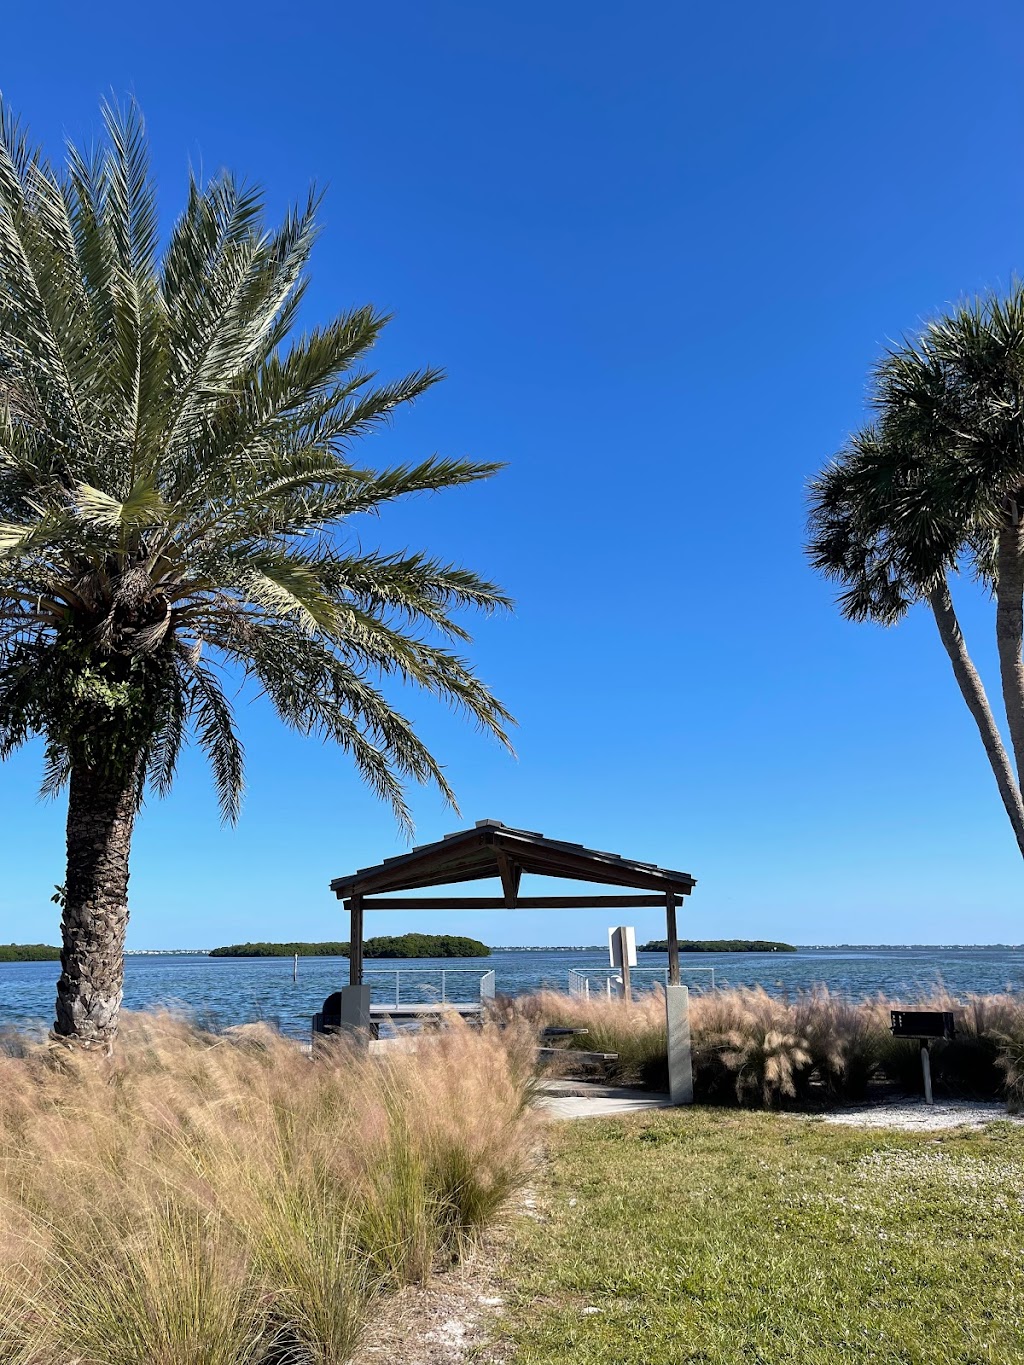 Bayfront Park Recreation Center | 4052 Gulf of Mexico Dr, Longboat Key, FL 34228 | Phone: (941) 316-1999